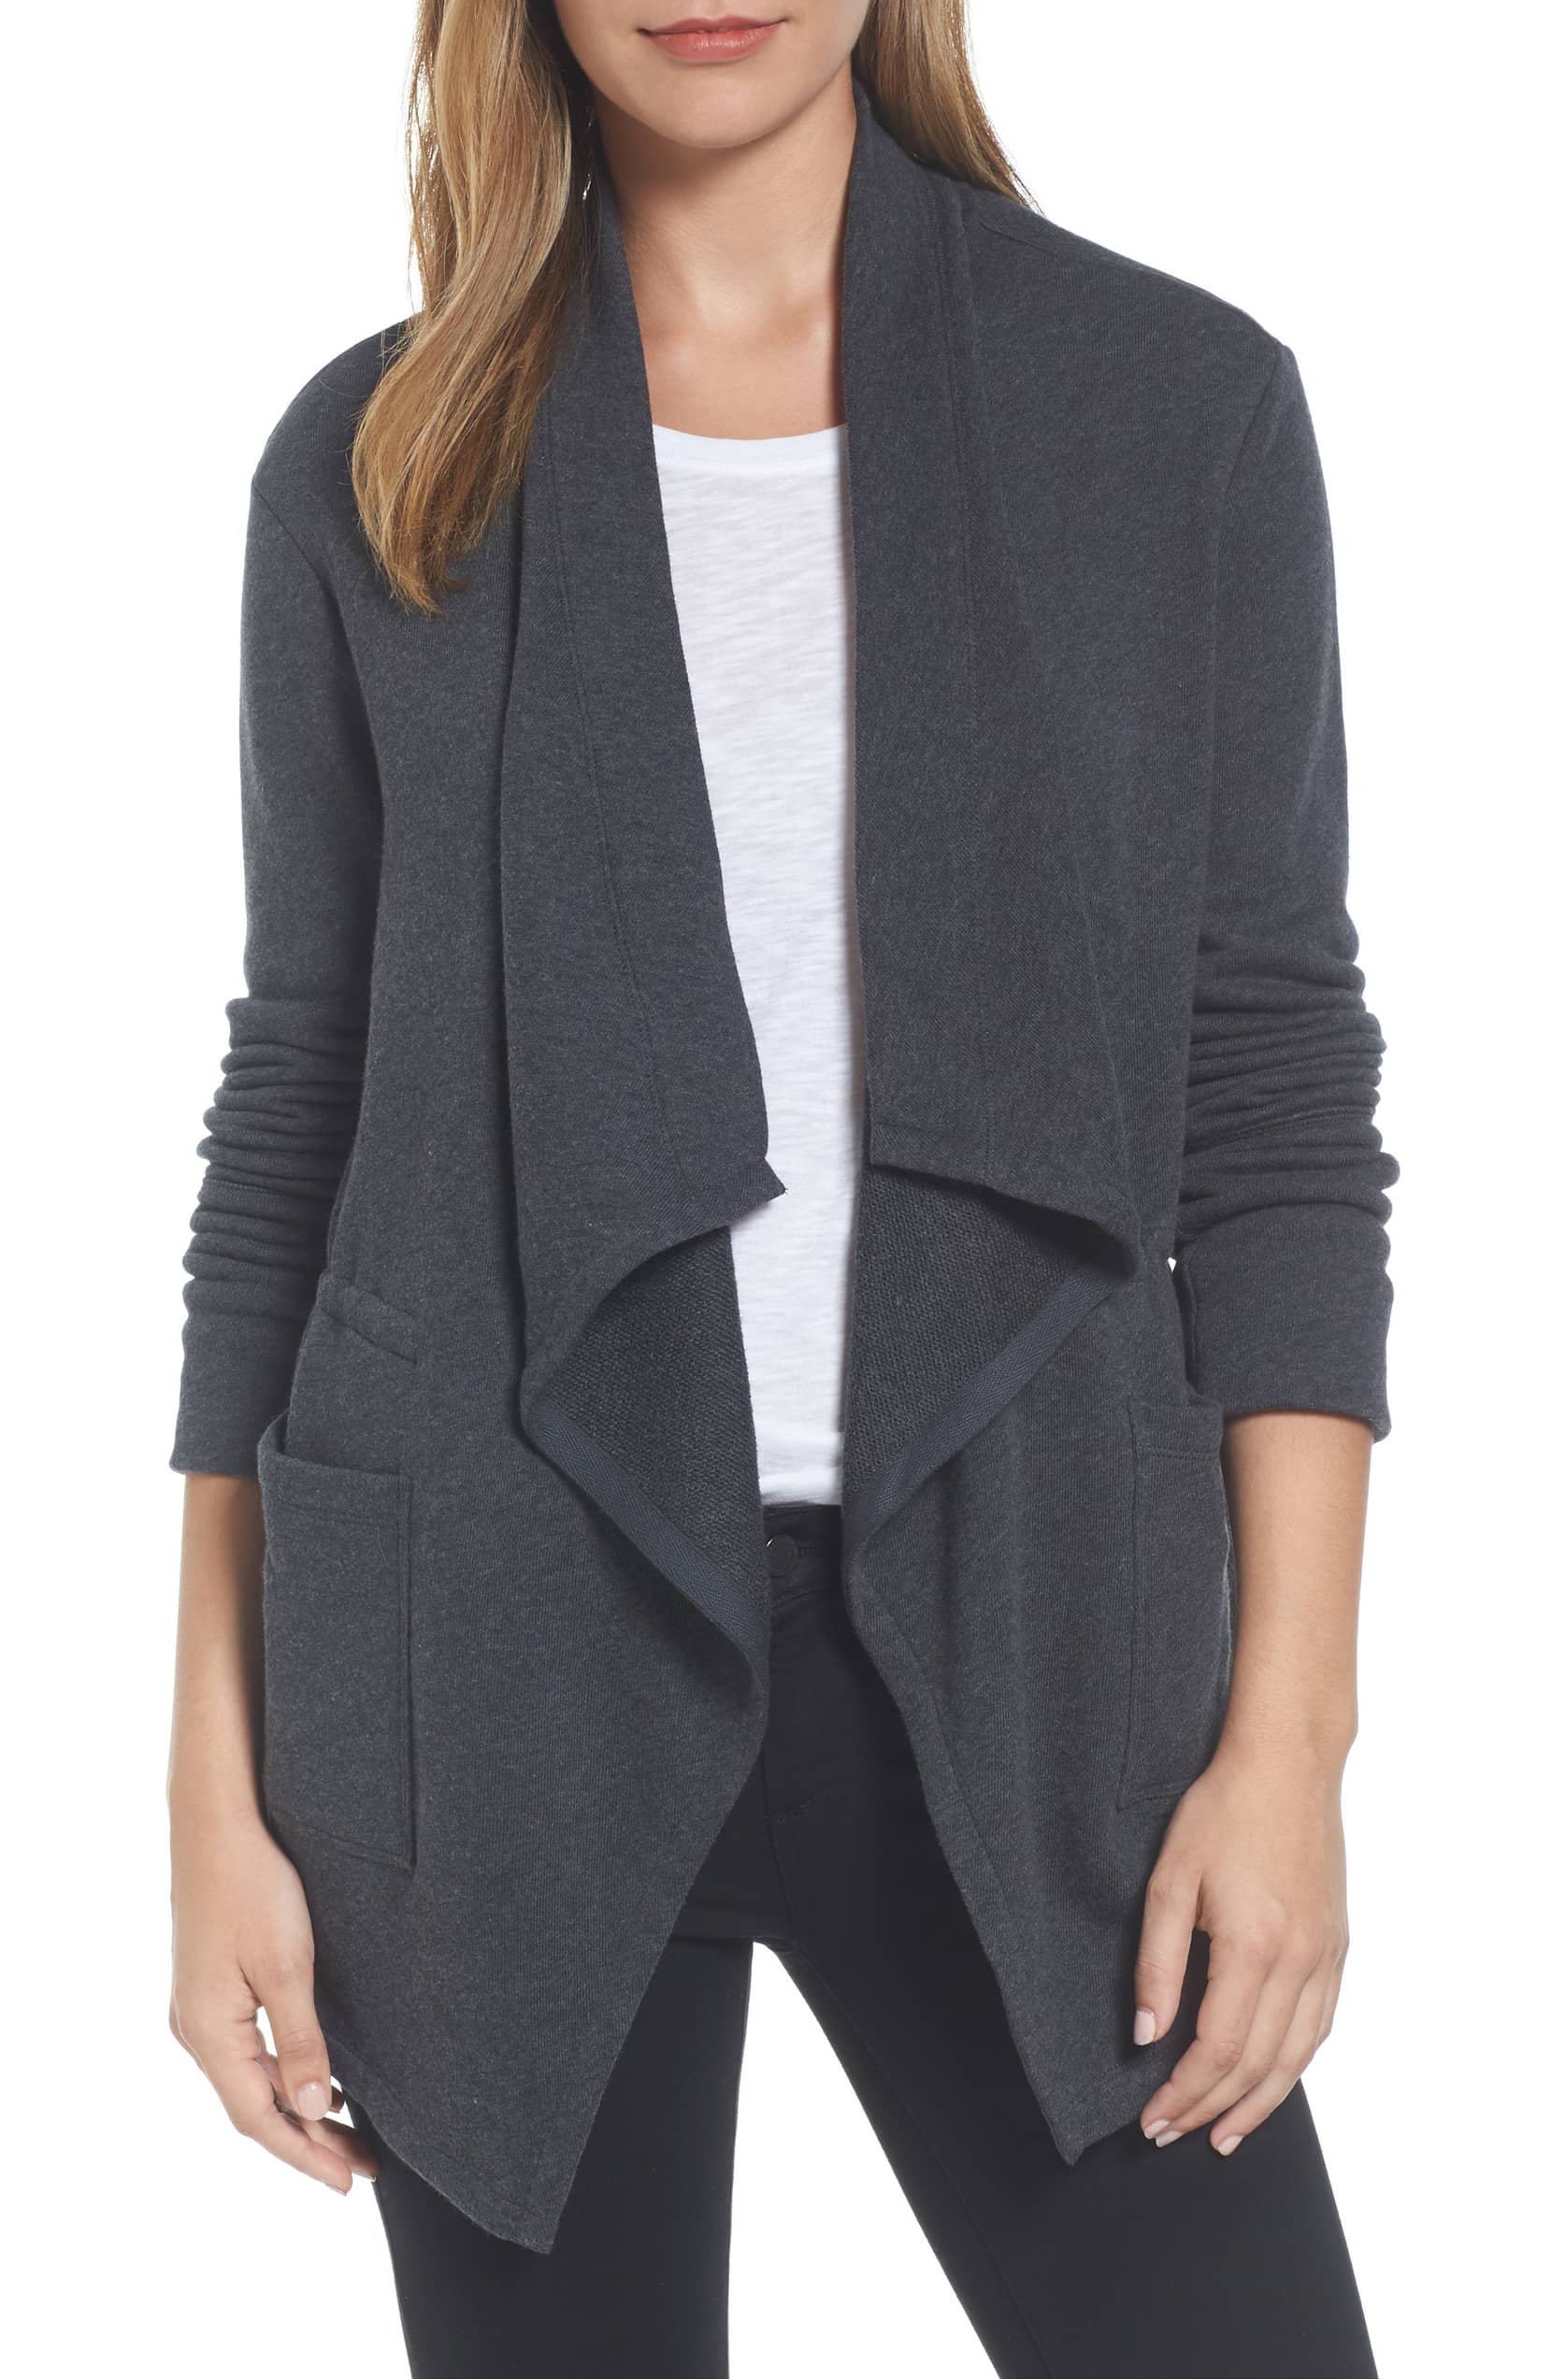 This Cozy Jacket Works Double Duty for the Office and Home